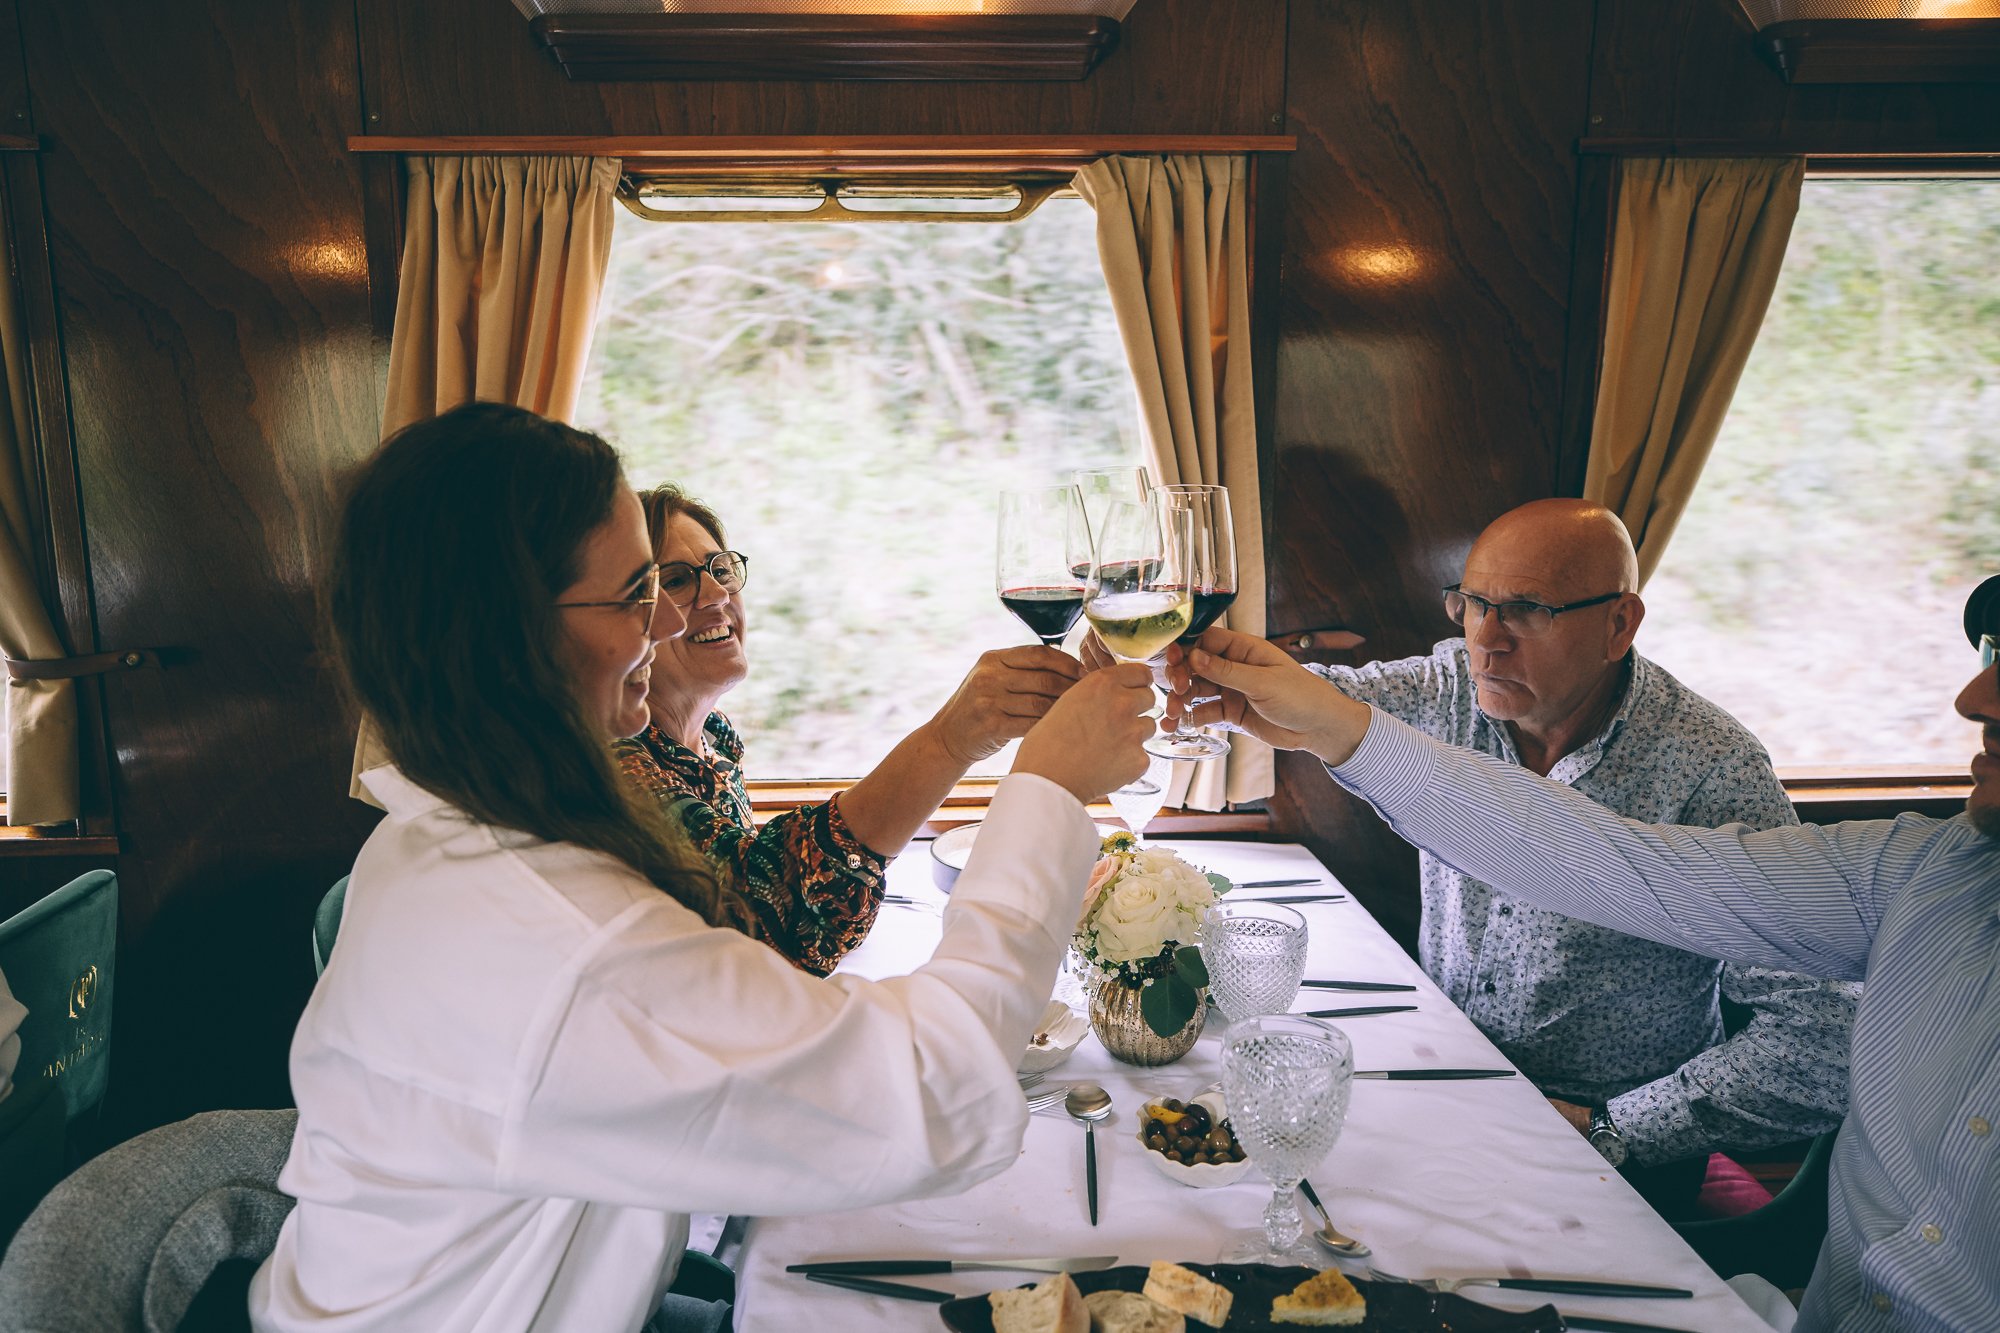 The picturesque Douro Valley unfolds, with terraced vineyards, meandering Douro River, and rolling hills, illustrating the breathtaking scenery witnessed during the Presidential Train journey.